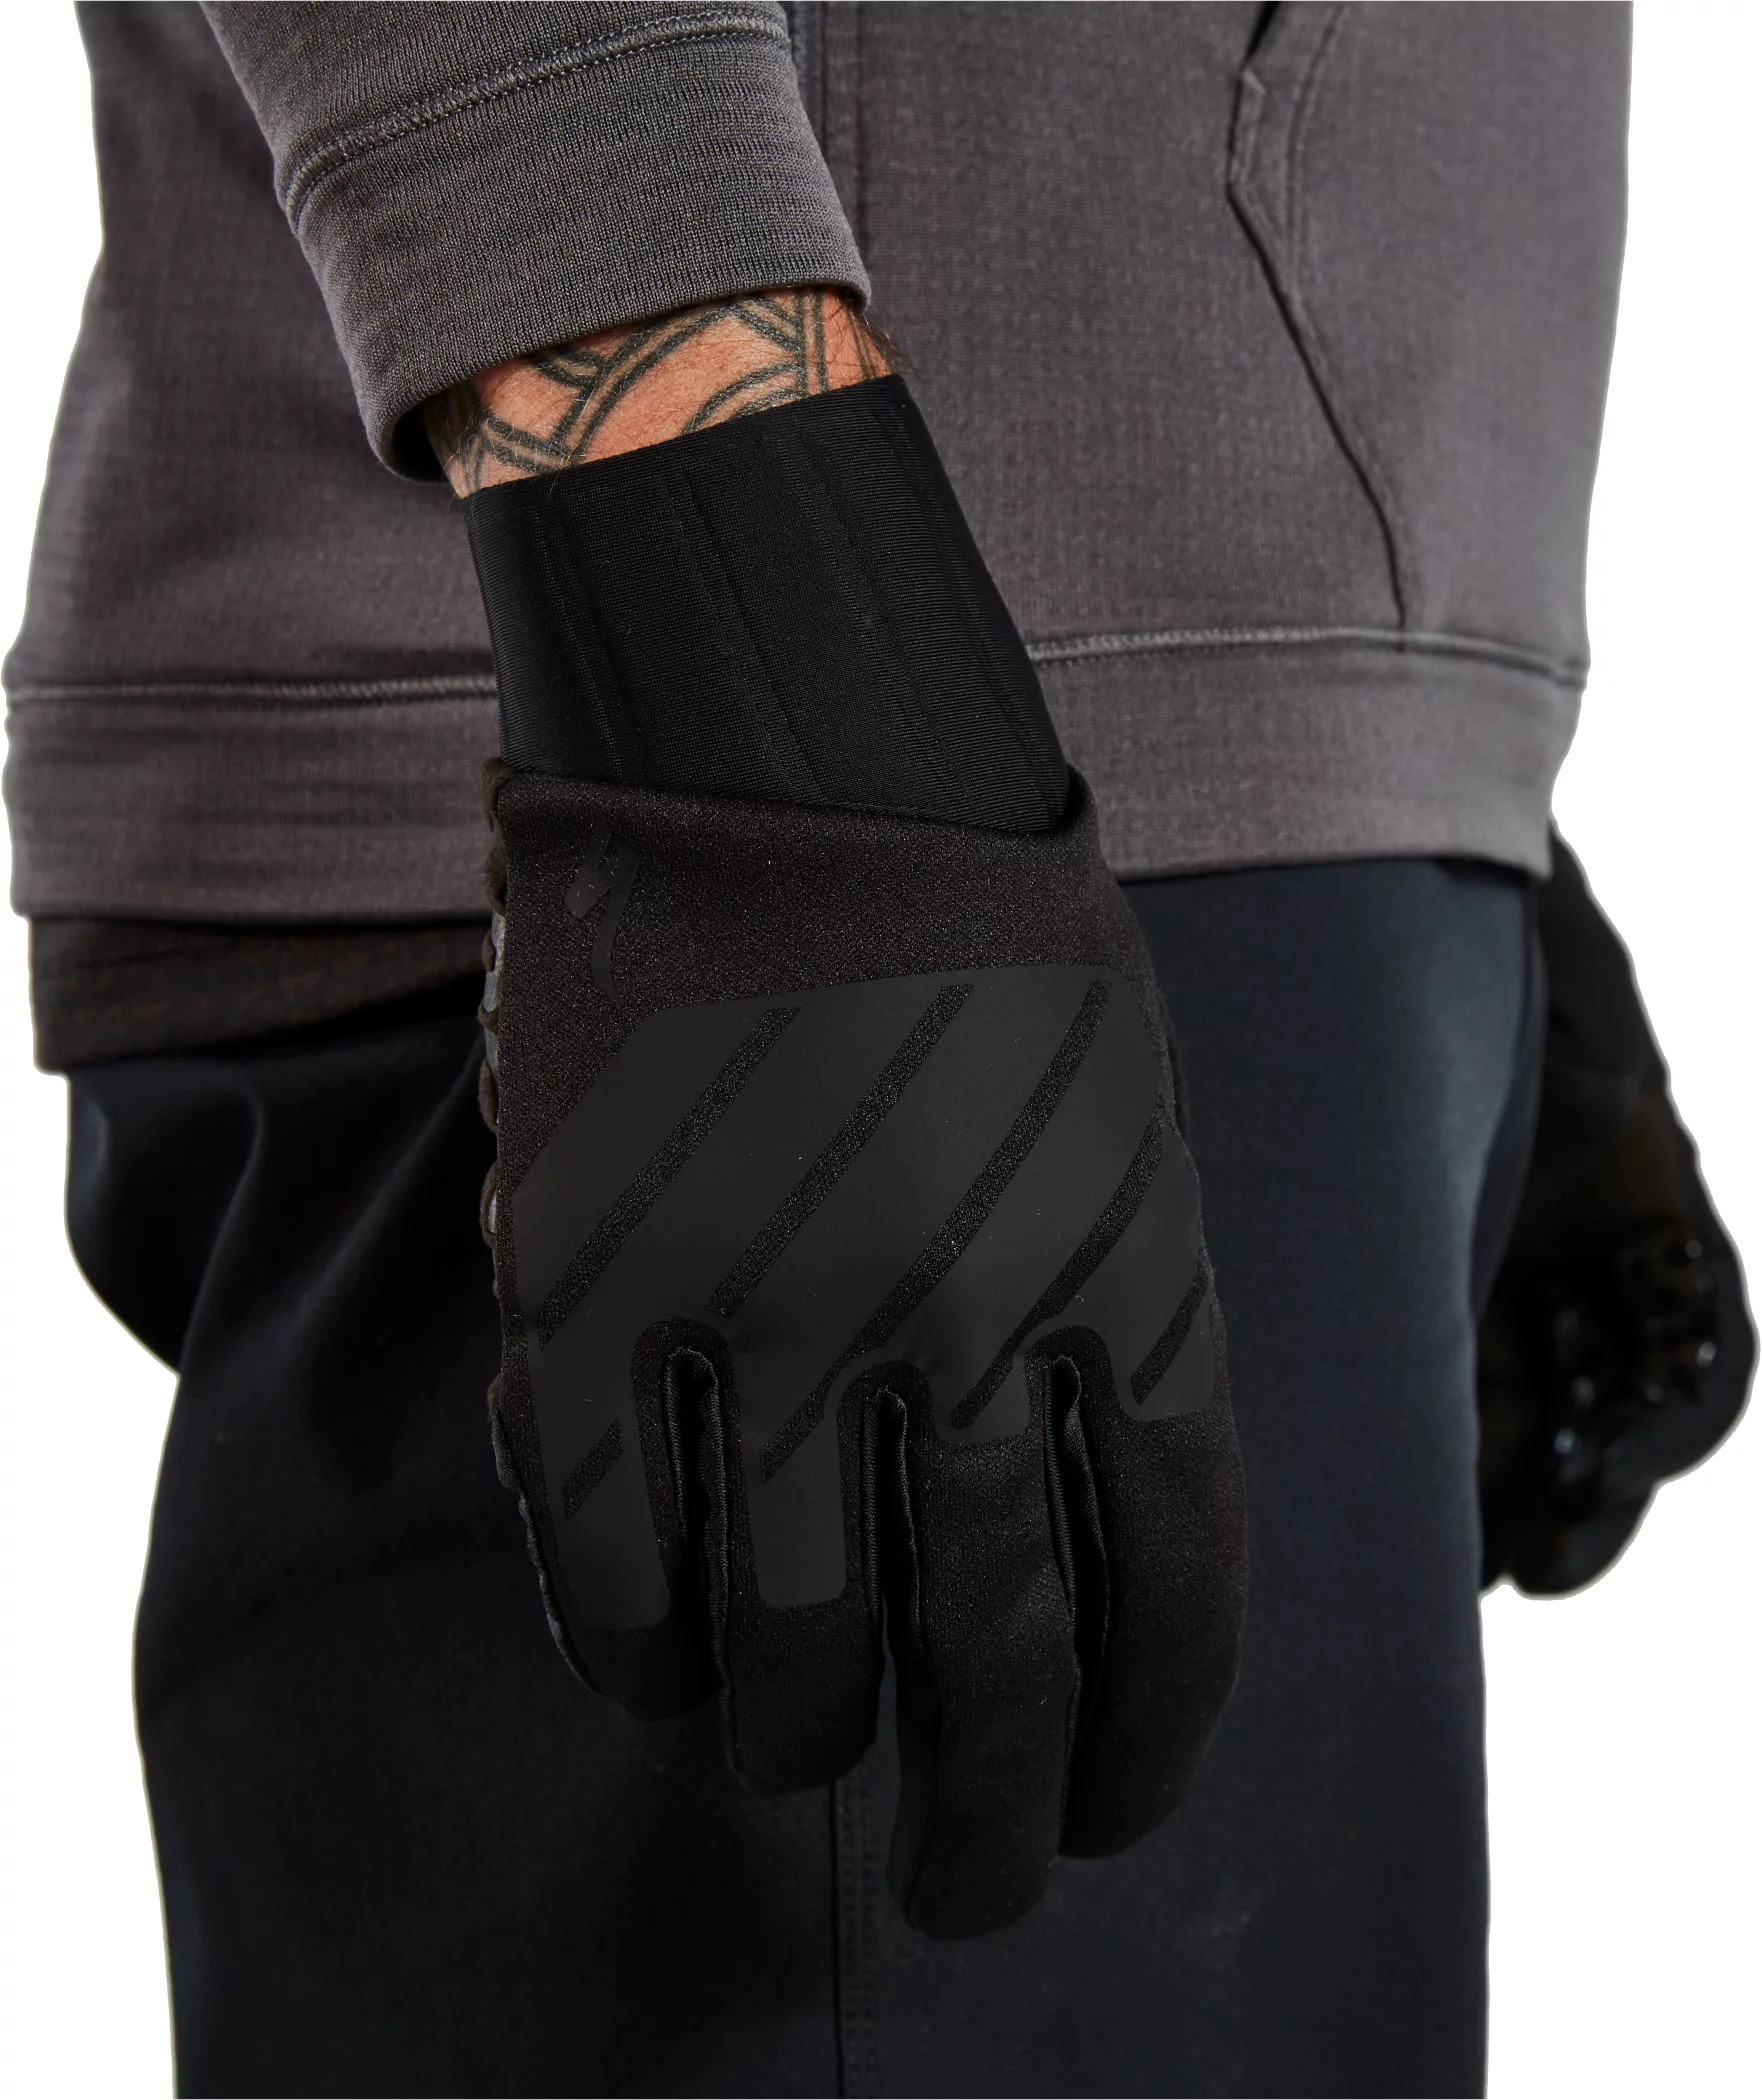 Mens_Trail_Thermal_Gloves